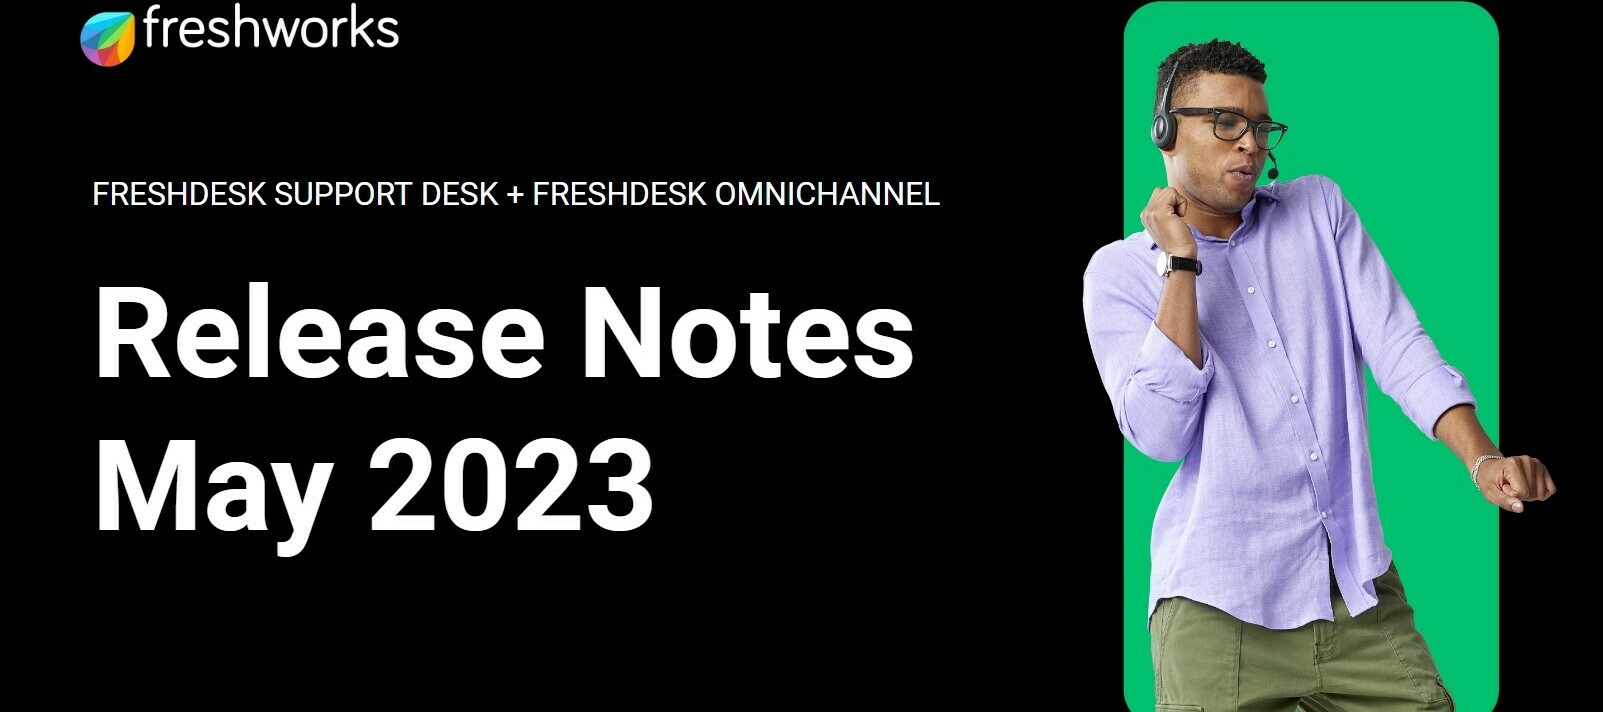 Freshdesk Release Notes - May 2023